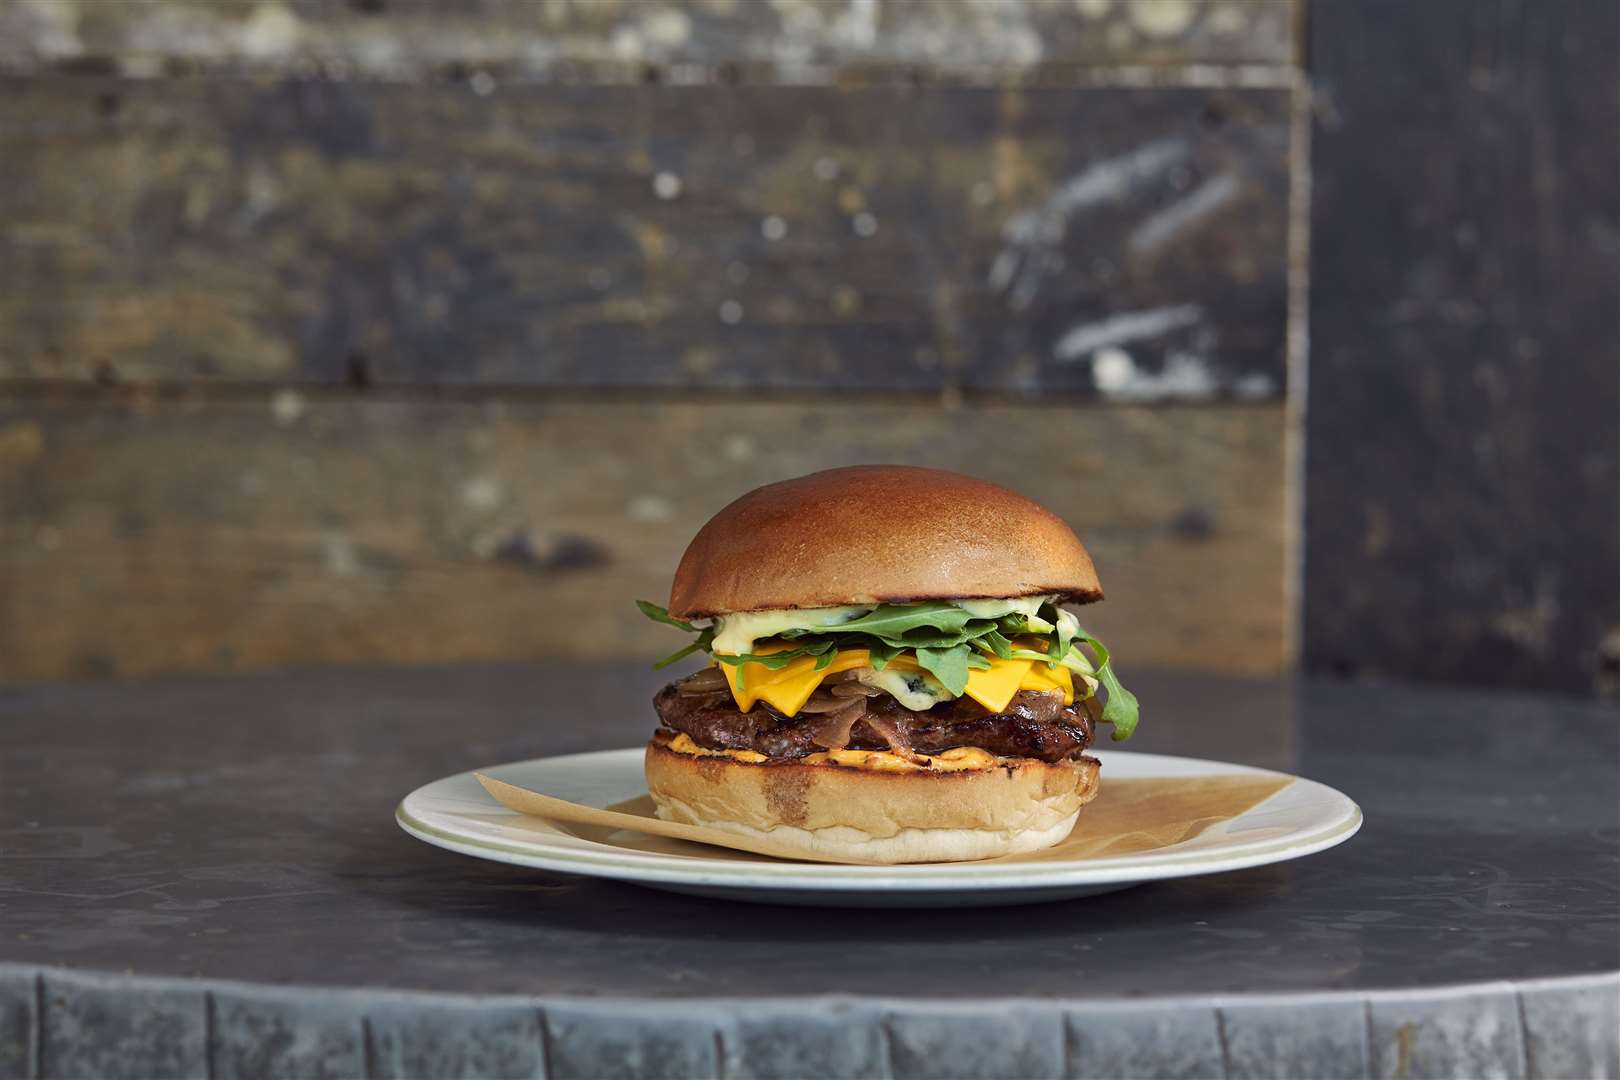 GBK burgers will no longer be sold in Canterbury or Maidstone